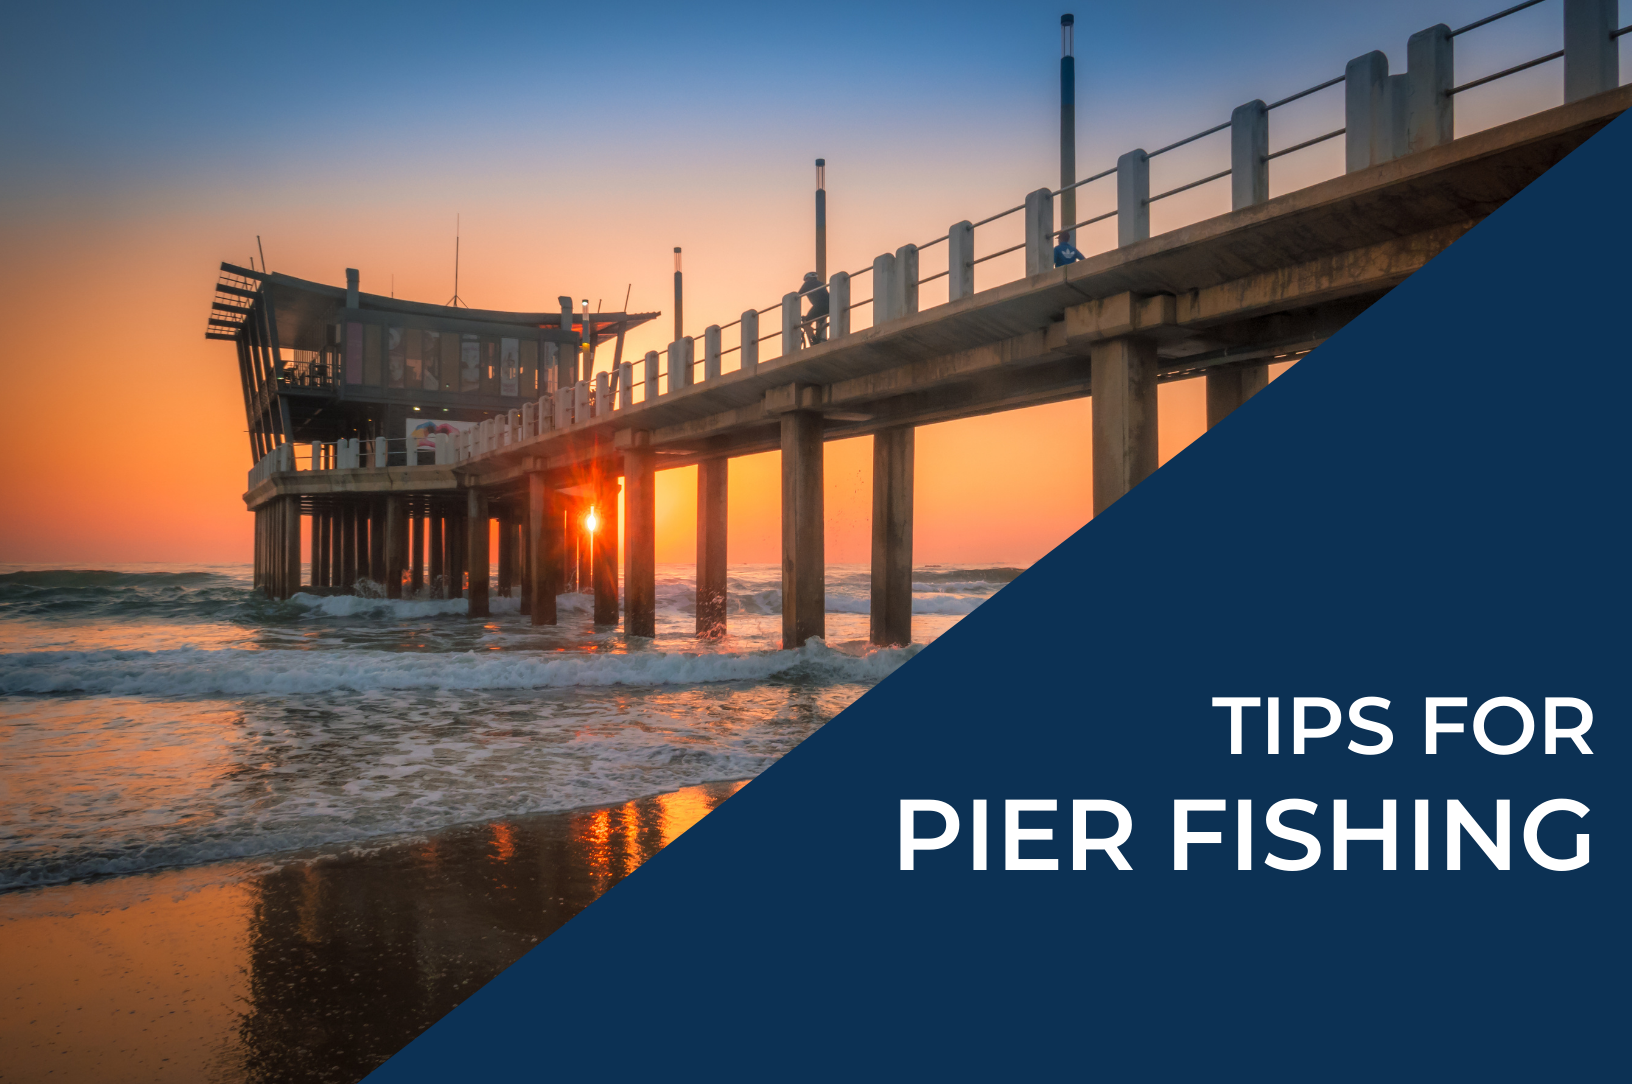 Tips when fishing from a pier